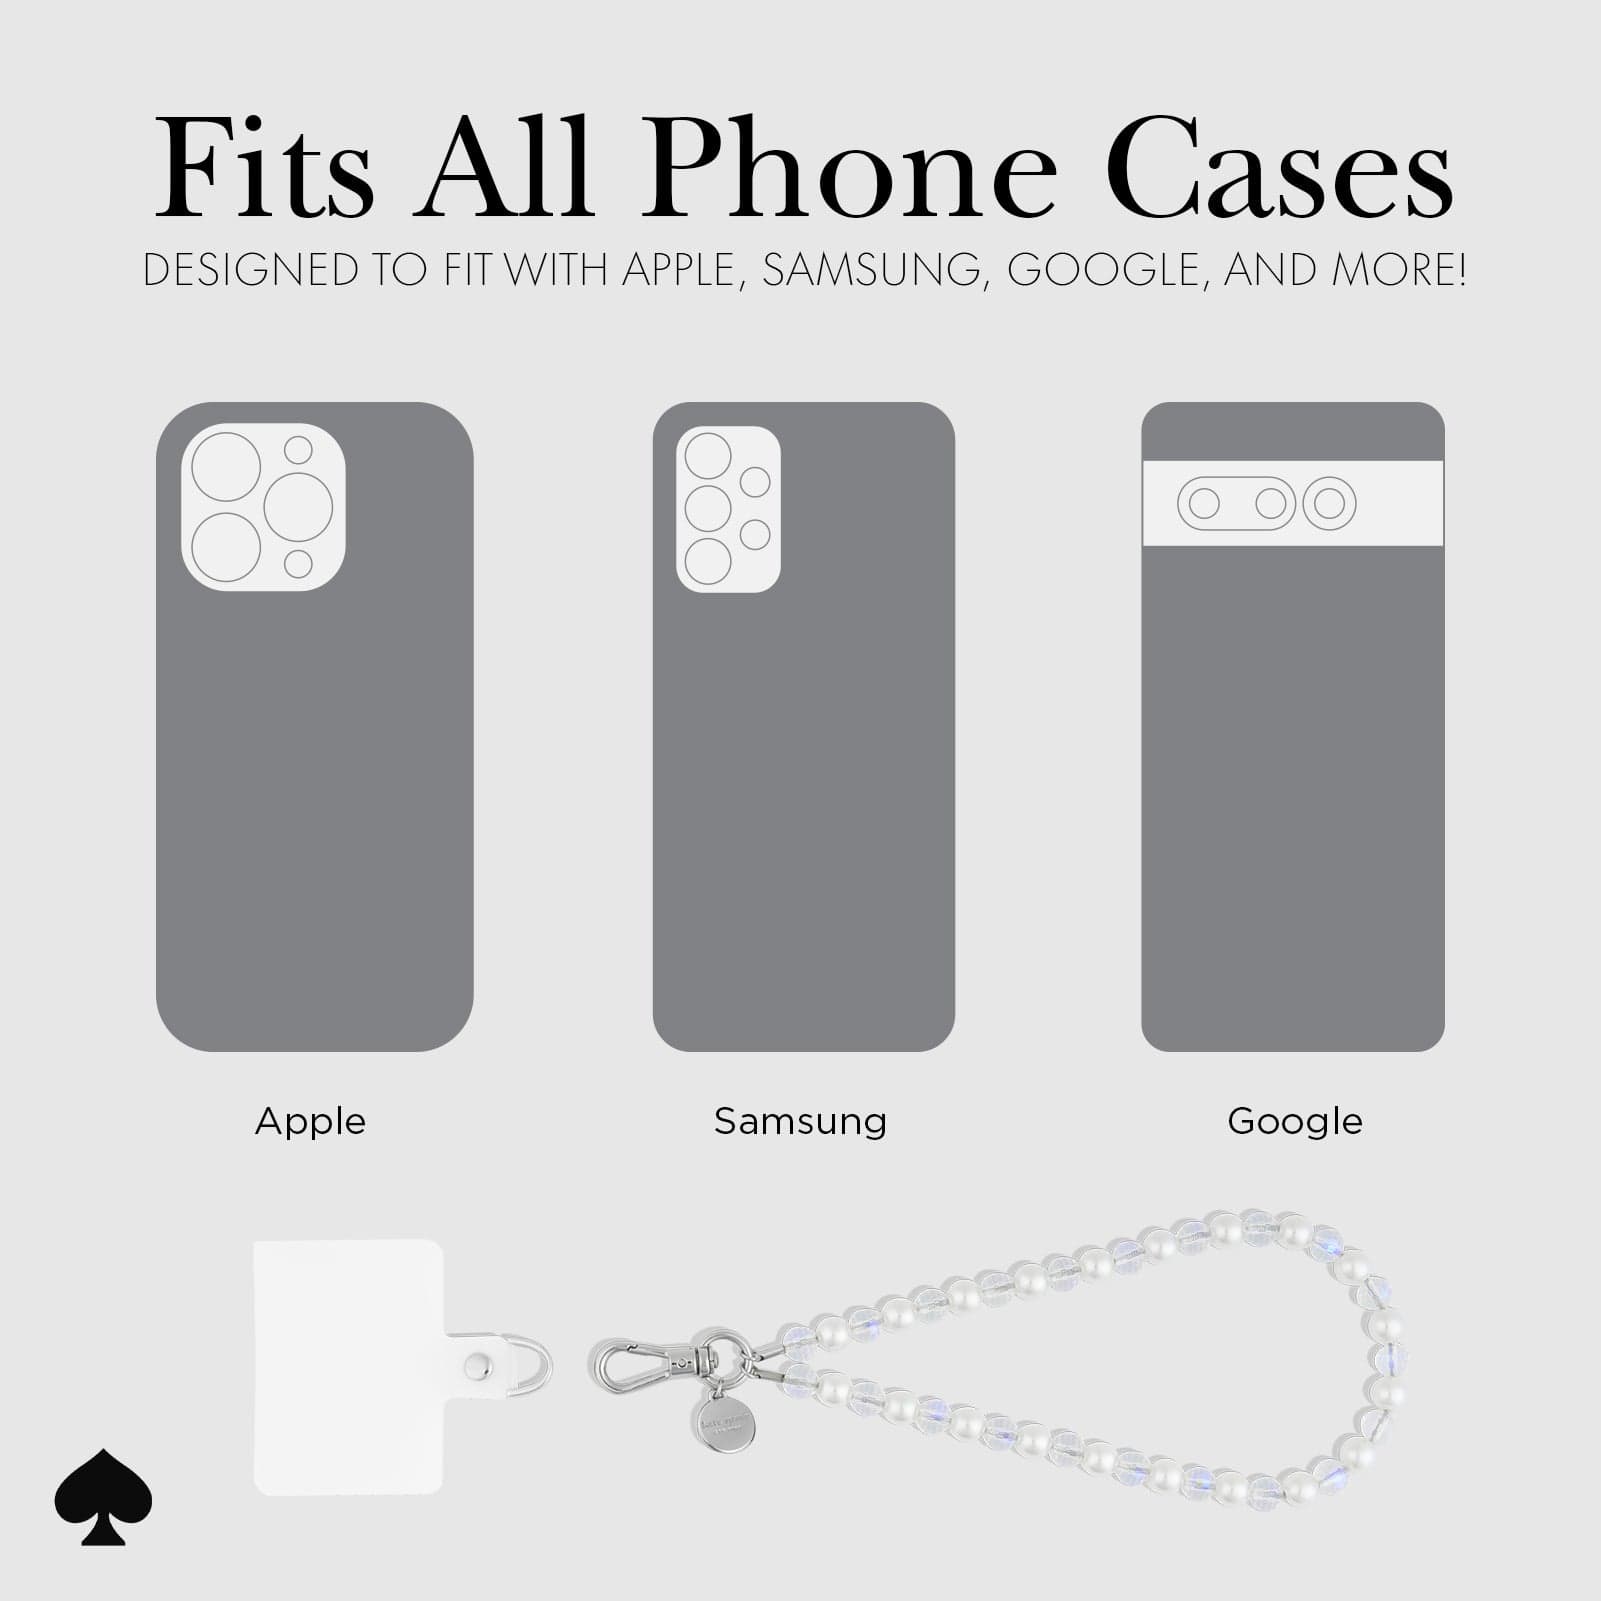 FITS ALL PHONE CASES DESIGNED TO FIT WITH APPLE, SAMSUNG, GOOGLE. AND MORE!